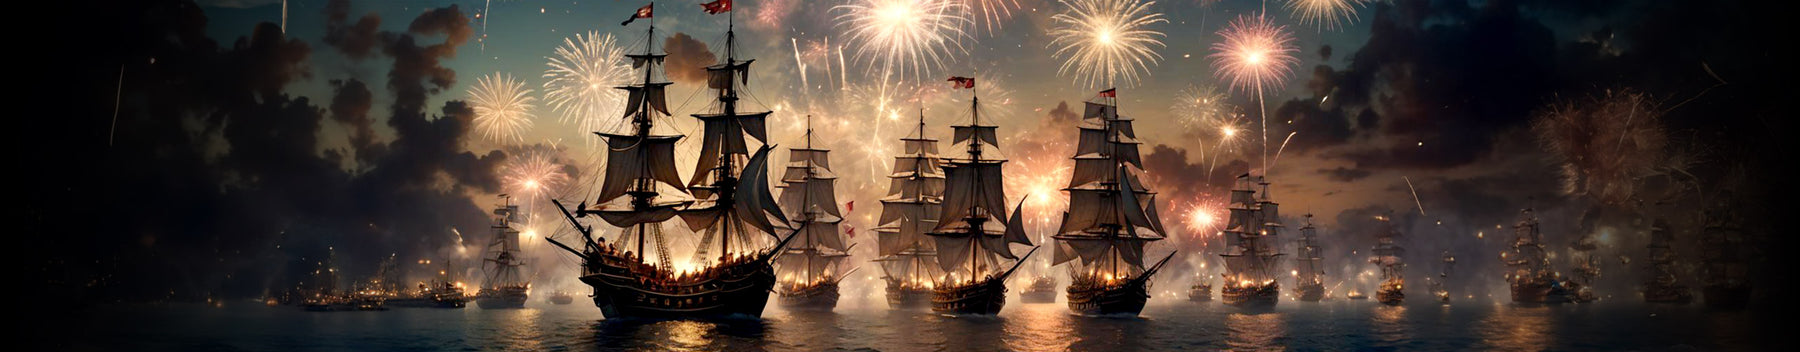 Skull and Bones: How to Use Fireworks